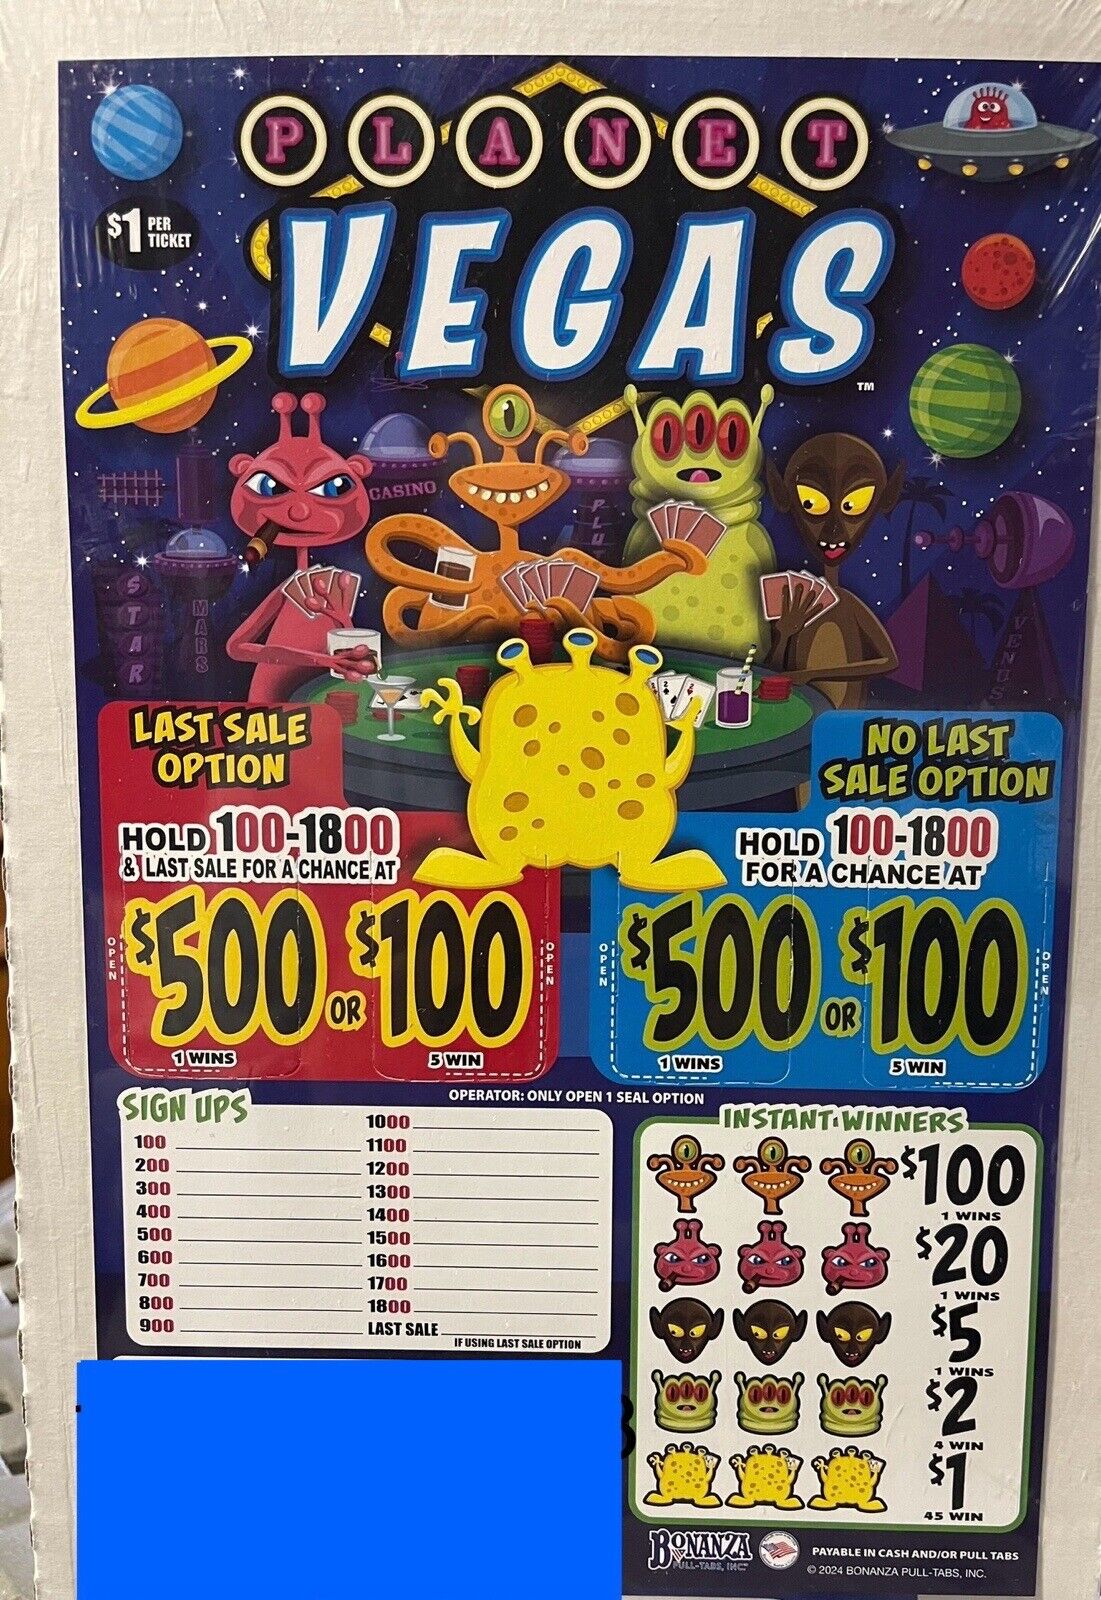 NEW pull Tickets Planet Vegas Tabs - Seal